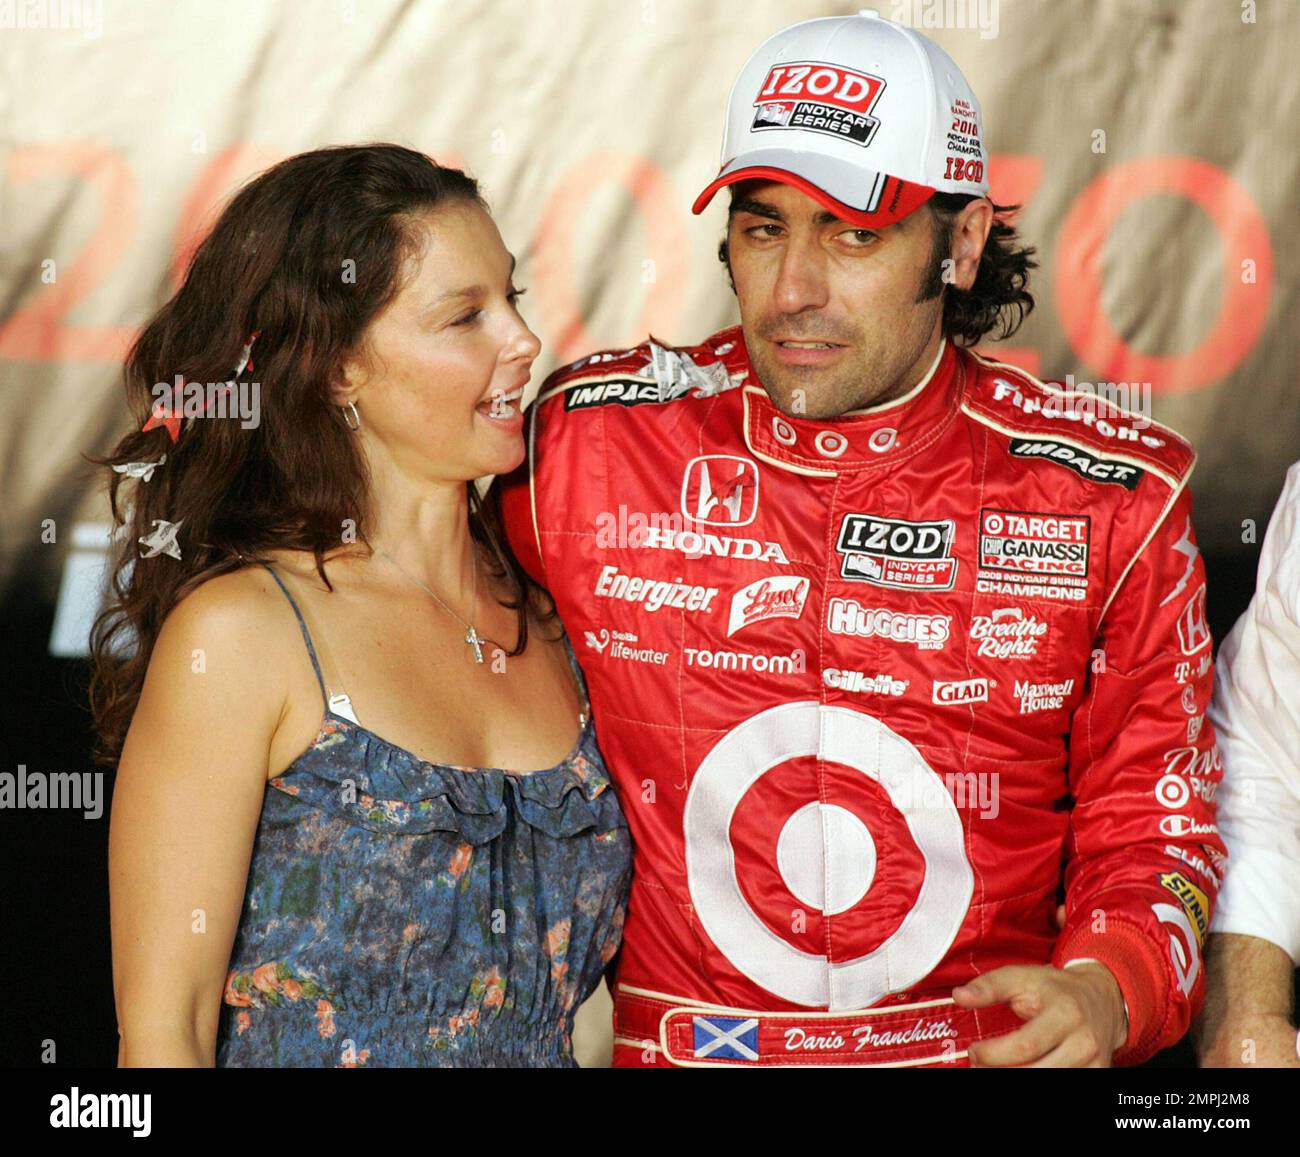 https://c8.alamy.com/comp/2MPJ2M8/indy-racing-league-driver-dario-franchitti-and-extremely-happy-looking-wife-actress-ashley-judd-celebrate-his-izod-indycar-series-title-championship-after-the-cafe-do-brasil-indy-300-held-at-the-homestead-miami-speedway-homestead-fl-100210-2MPJ2M8.jpg